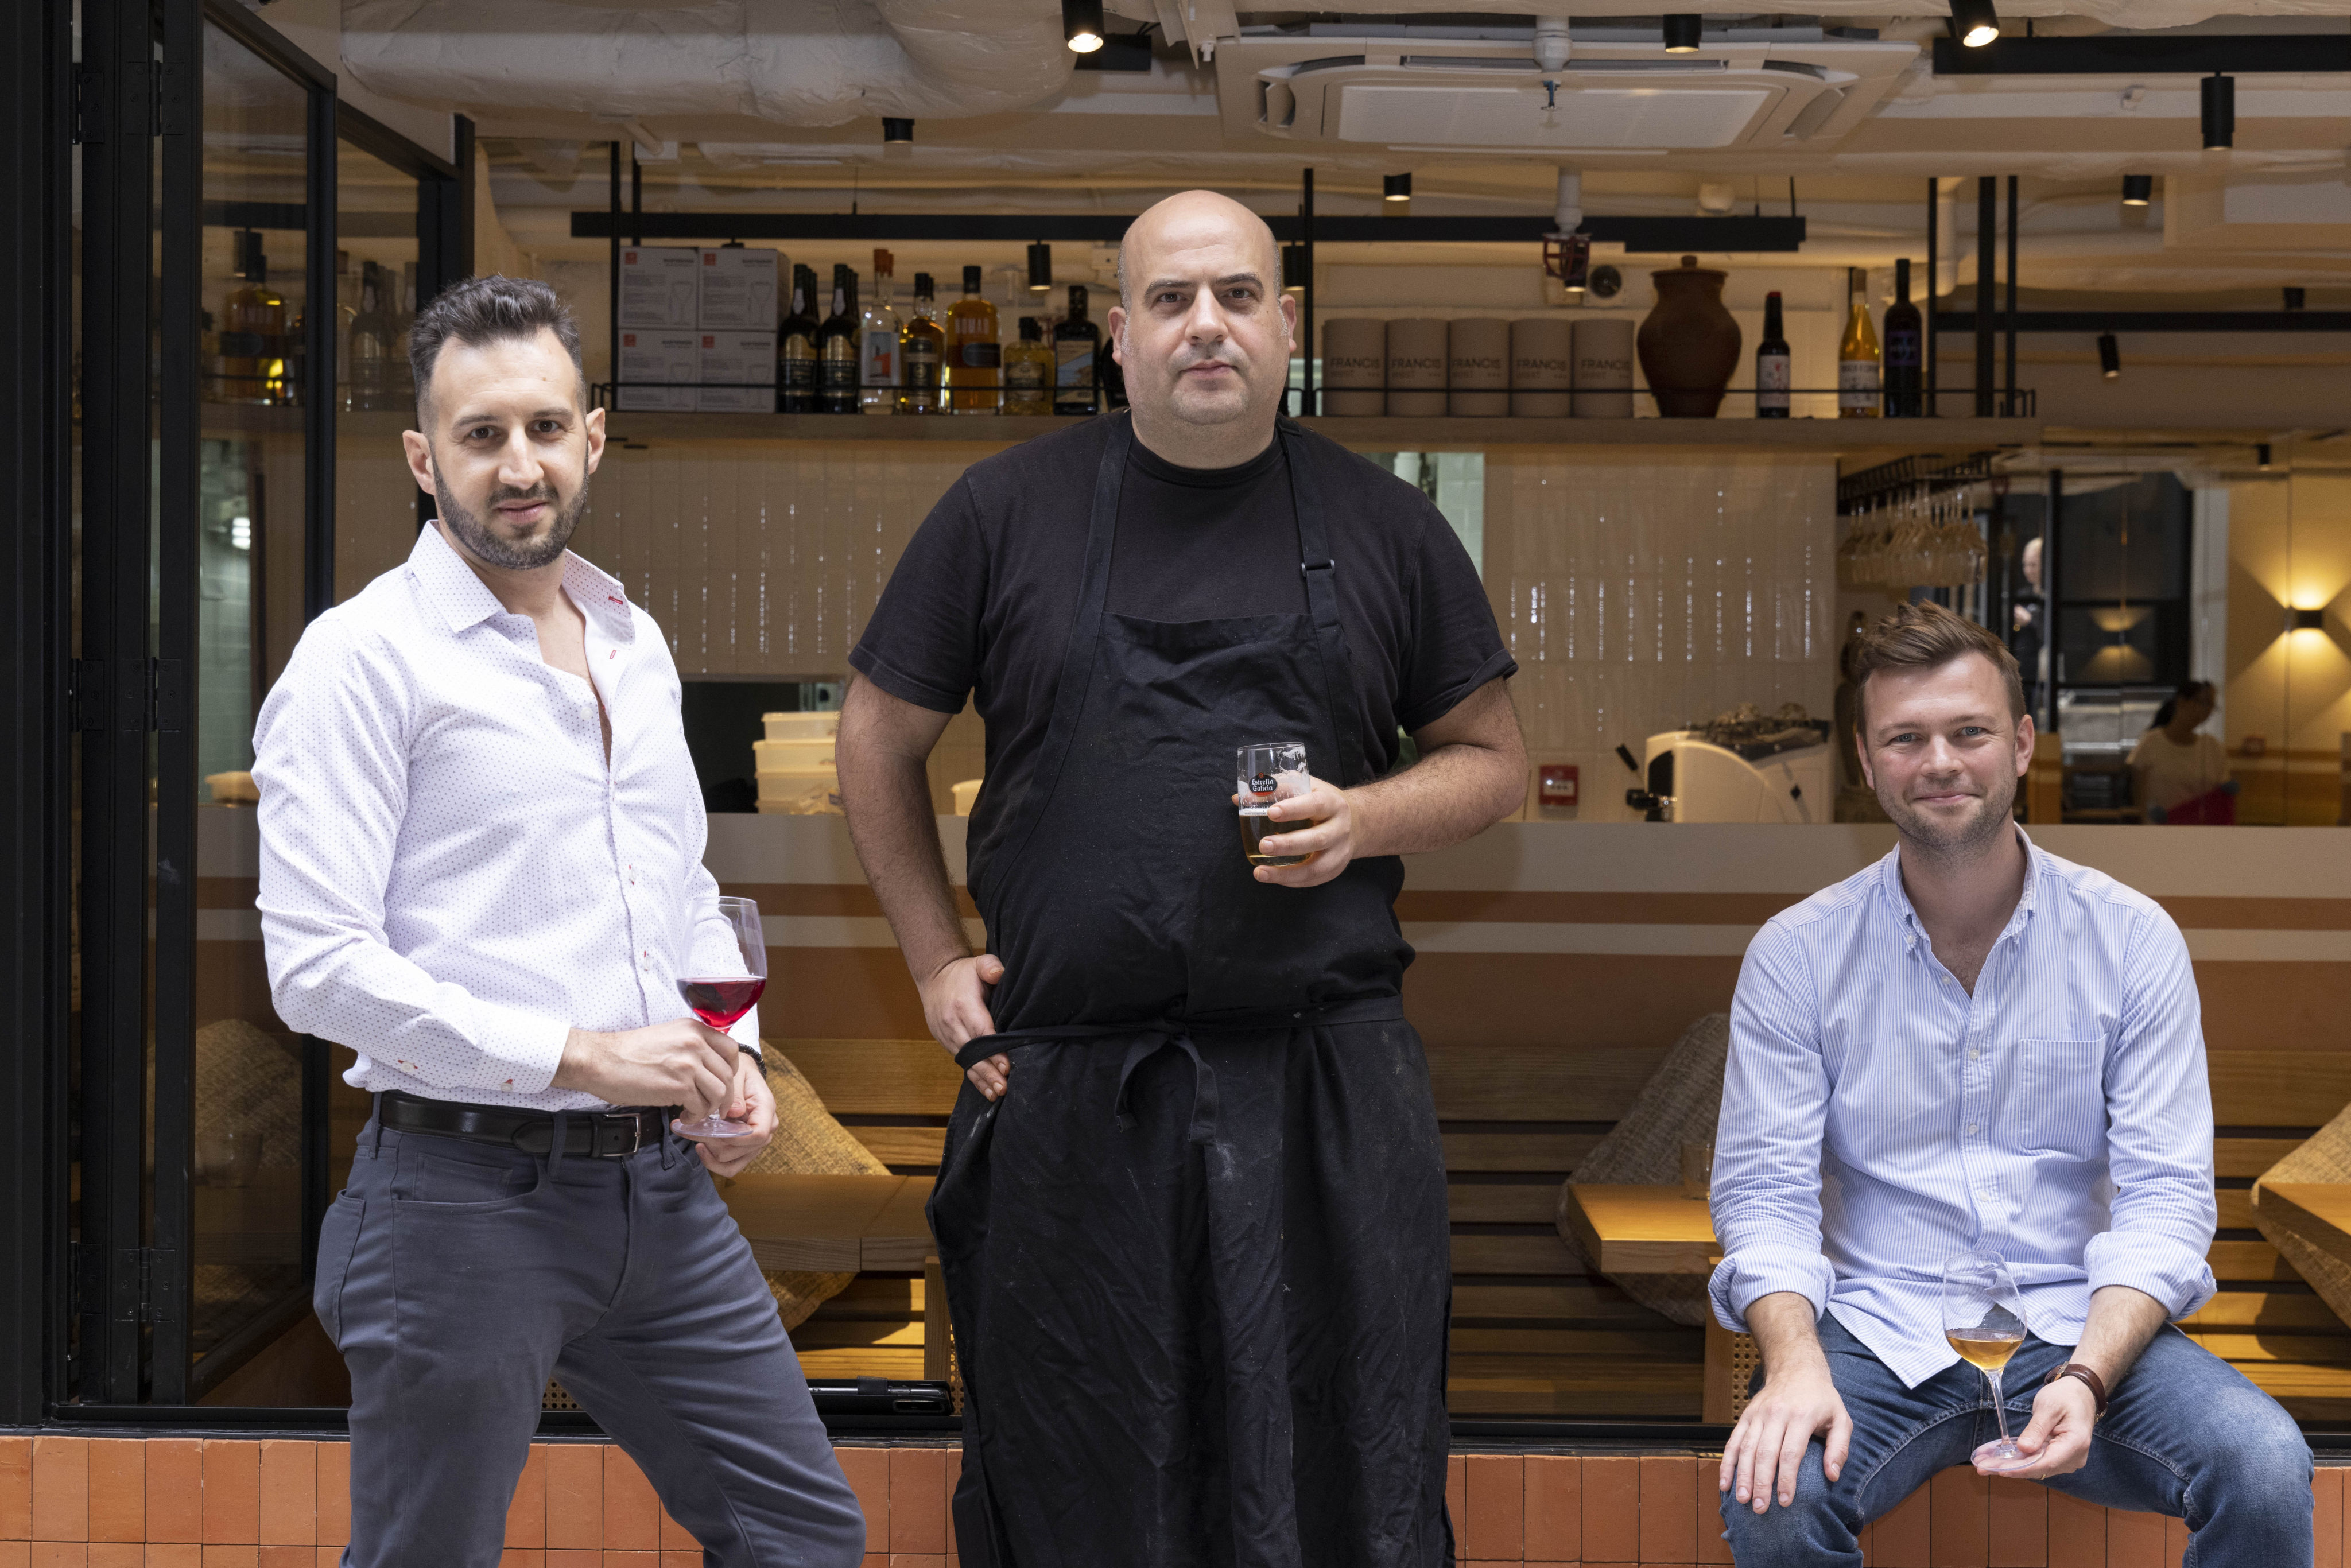 (From left) Sommelier Simone Sammuri, chef Asher Goldstein and restaurateur James Ward at Francis West in Hong Kong. For the team, Francis West is a fresh opportunity to refocus on the Francis brand. Photo: Francis West